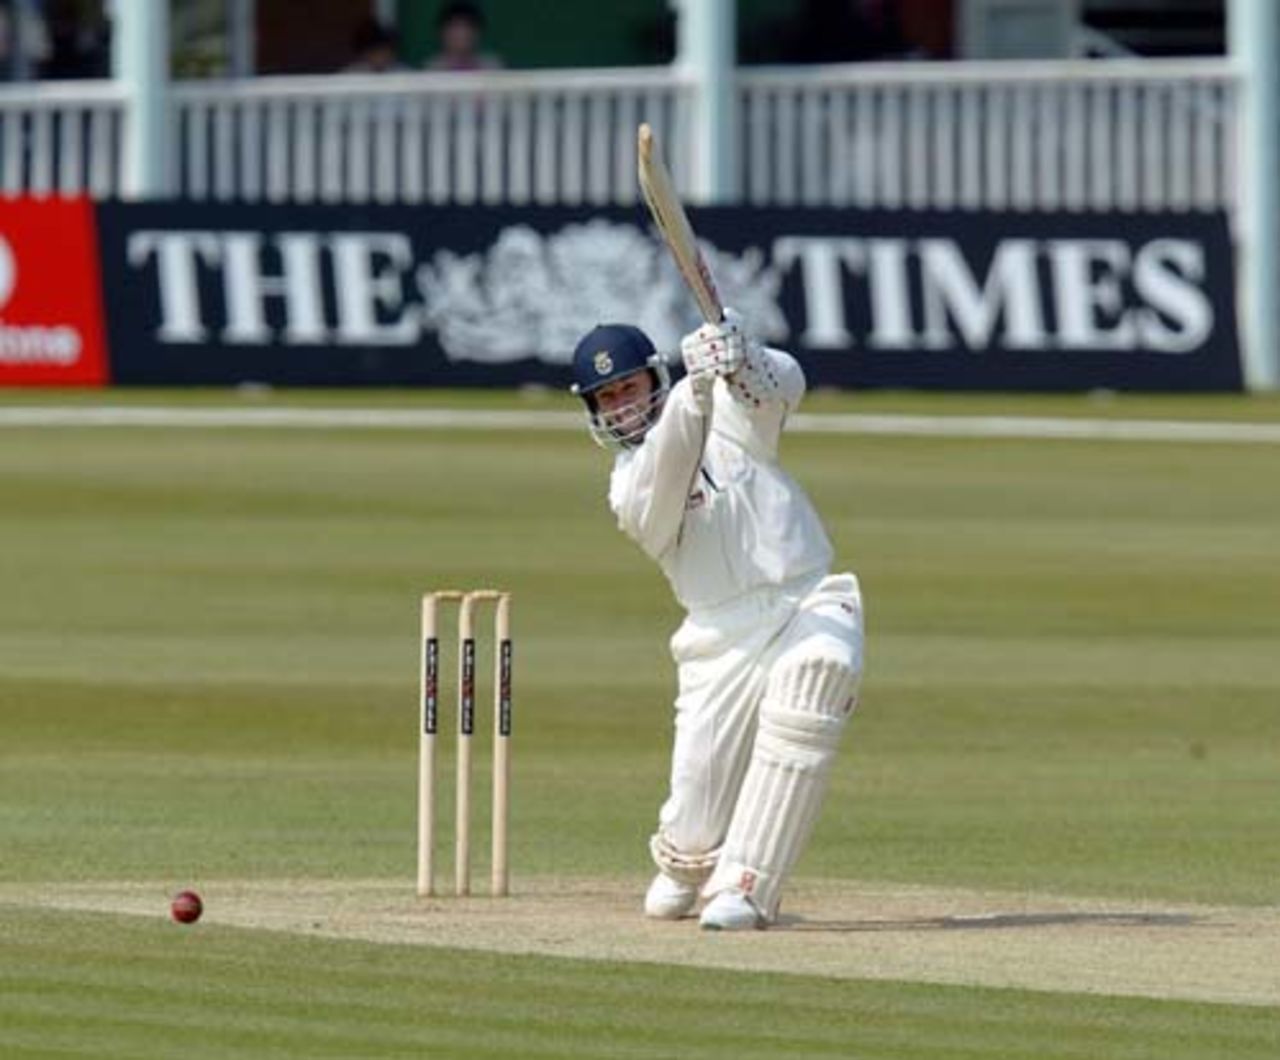 John Crawley's debut innings for Hampshire on his way to a record 272.